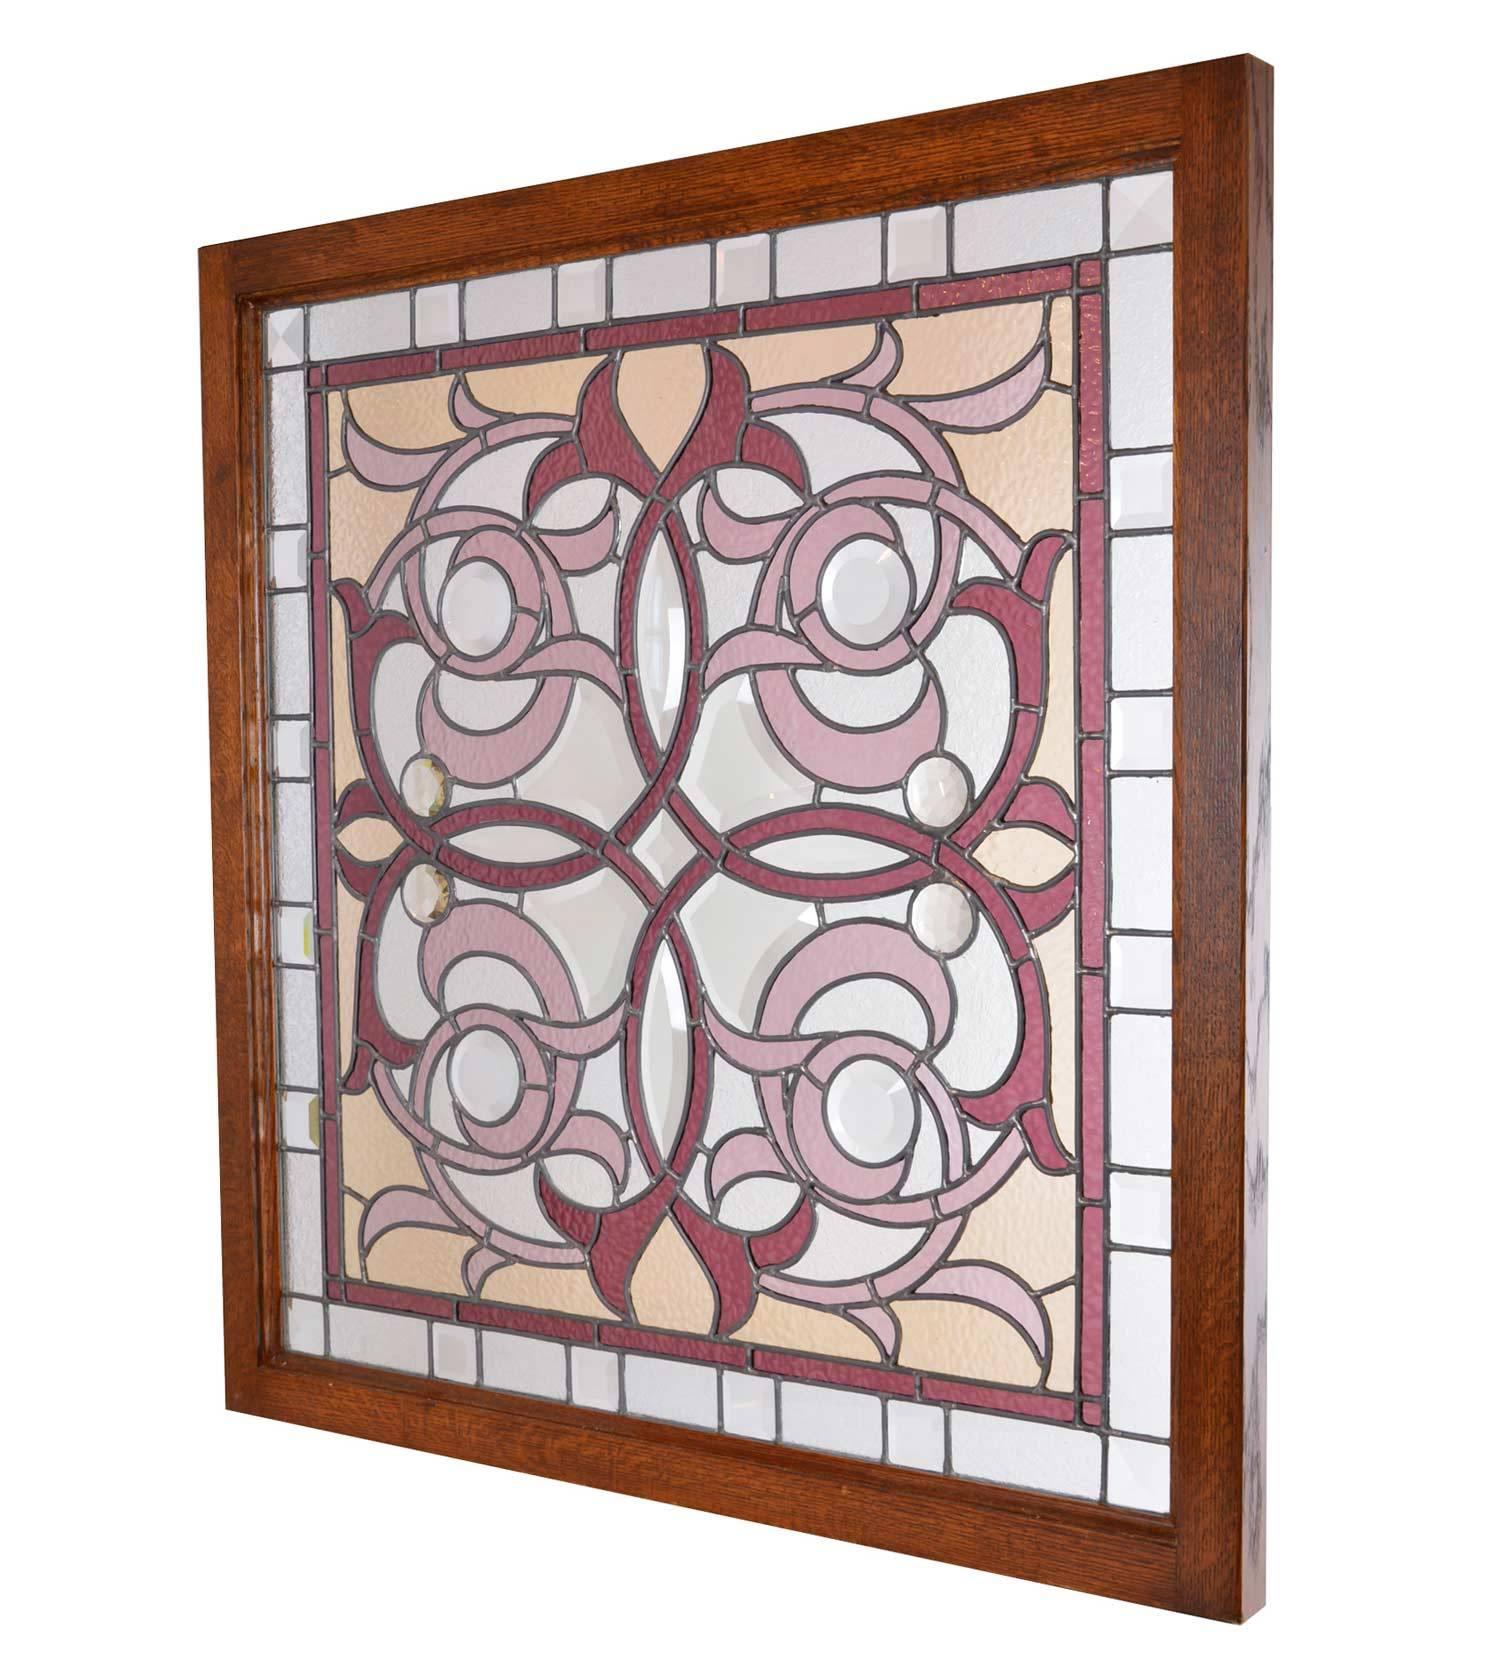 Late Victorian Late 19th Century Fanciful Victorian Window with Beveled Jewels